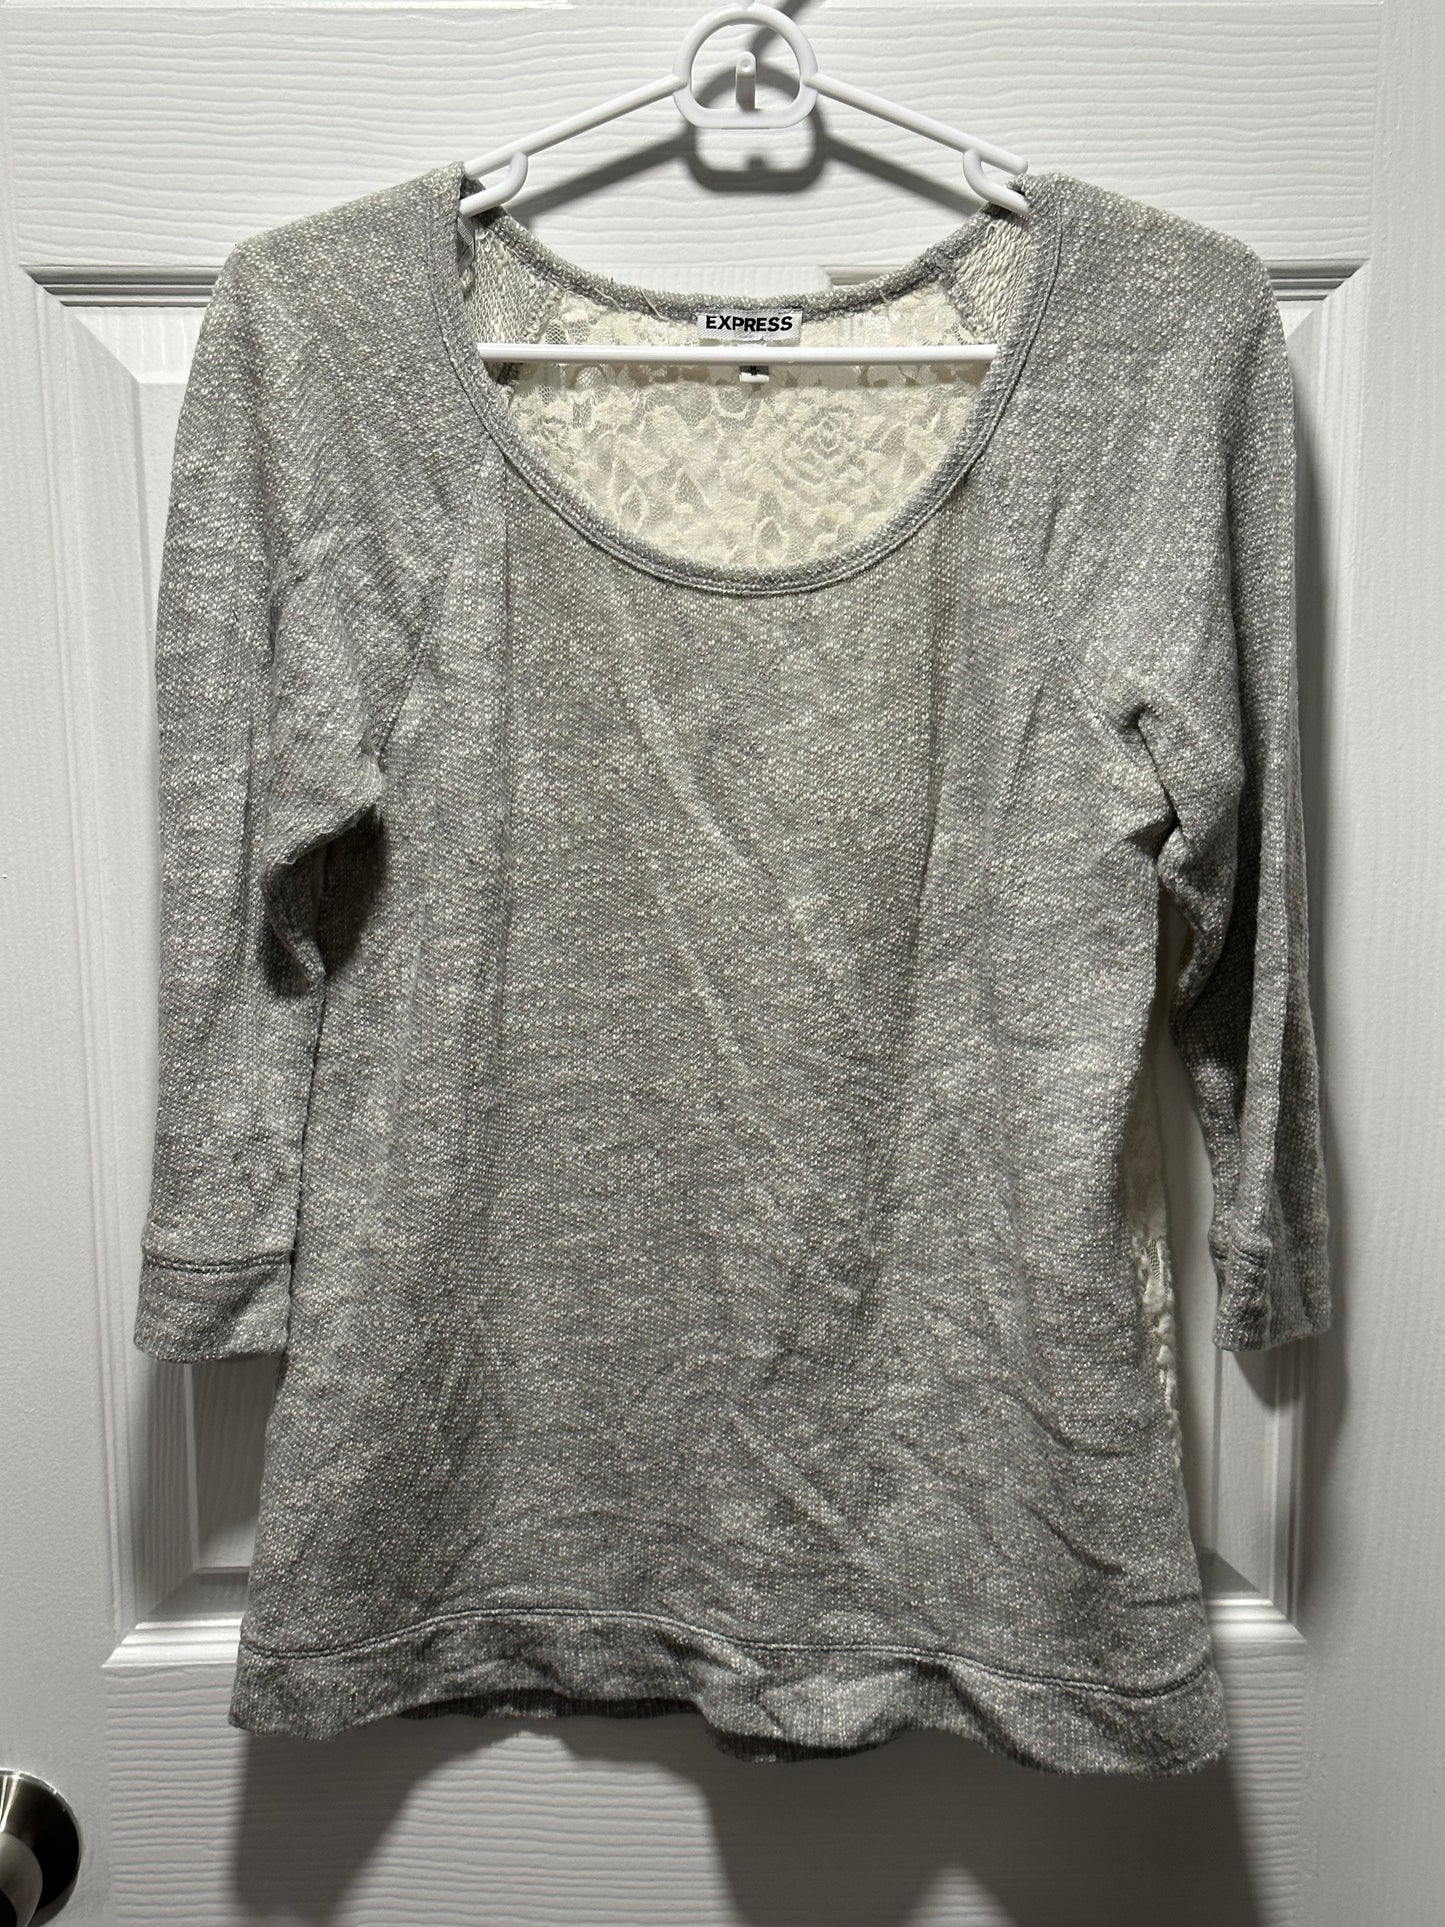 Express 3/4 Sleeve Gray Sweater with Lace Back - Women’s M - VGUC